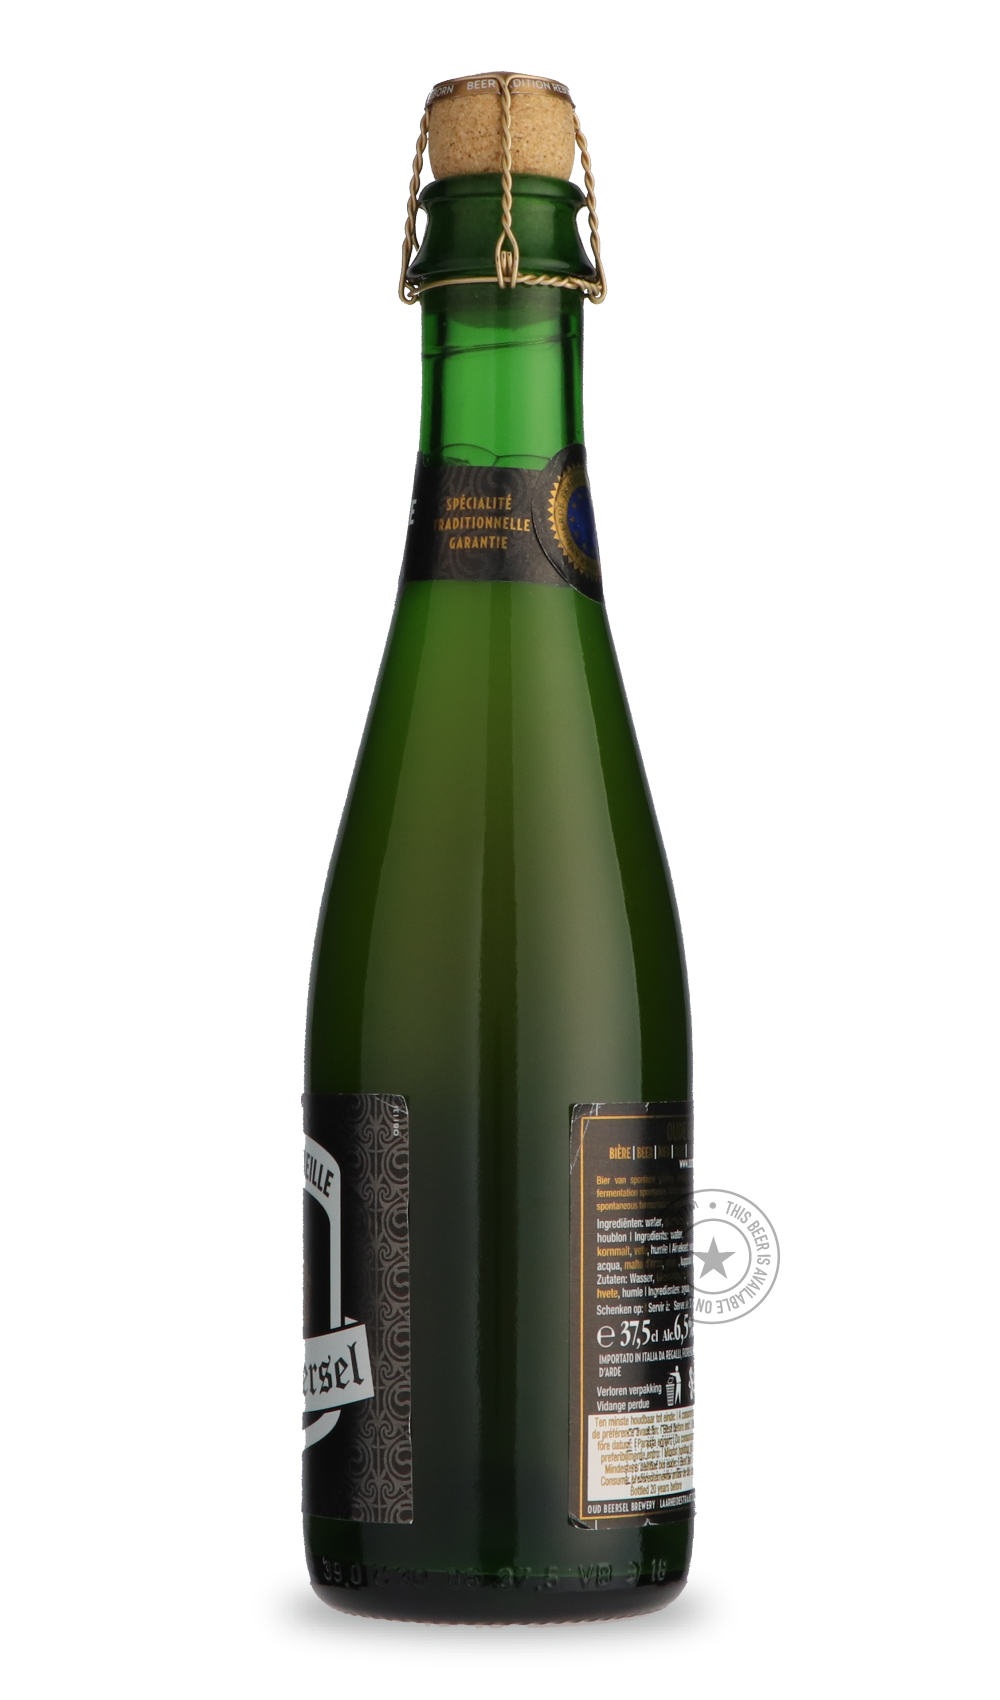 -Oud Beersel- Oude Geuze (Vieille)-Sour / Wild & Fruity- Only @ Beer Republic - The best online beer store for American & Canadian craft beer - Buy beer online from the USA and Canada - Bier online kopen - Amerikaans bier kopen - Craft beer store - Craft beer kopen - Amerikanisch bier kaufen - Bier online kaufen - Acheter biere online - IPA - Stout - Porter - New England IPA - Hazy IPA - Imperial Stout - Barrel Aged - Barrel Aged Imperial Stout - Brown - Dark beer - Blond - Blonde - Pilsner - Lager - Wheat 